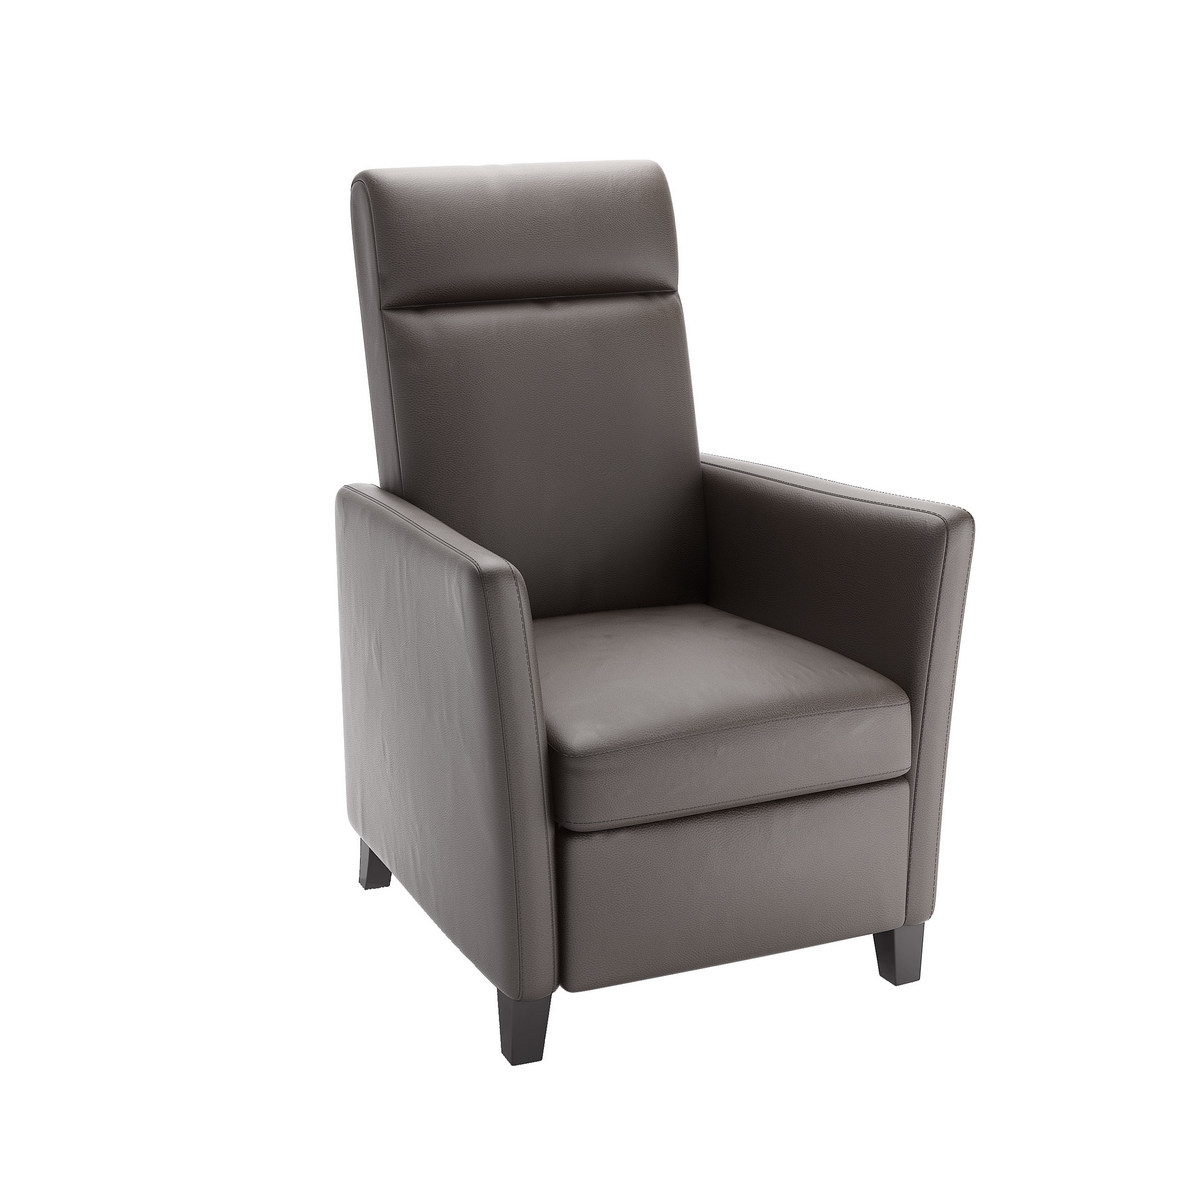 quality furniture - CorLiving LZY-525-R Elise Brownish-Grey Bonded Leather Recliner LZY-525-R - CorLiving Recliners